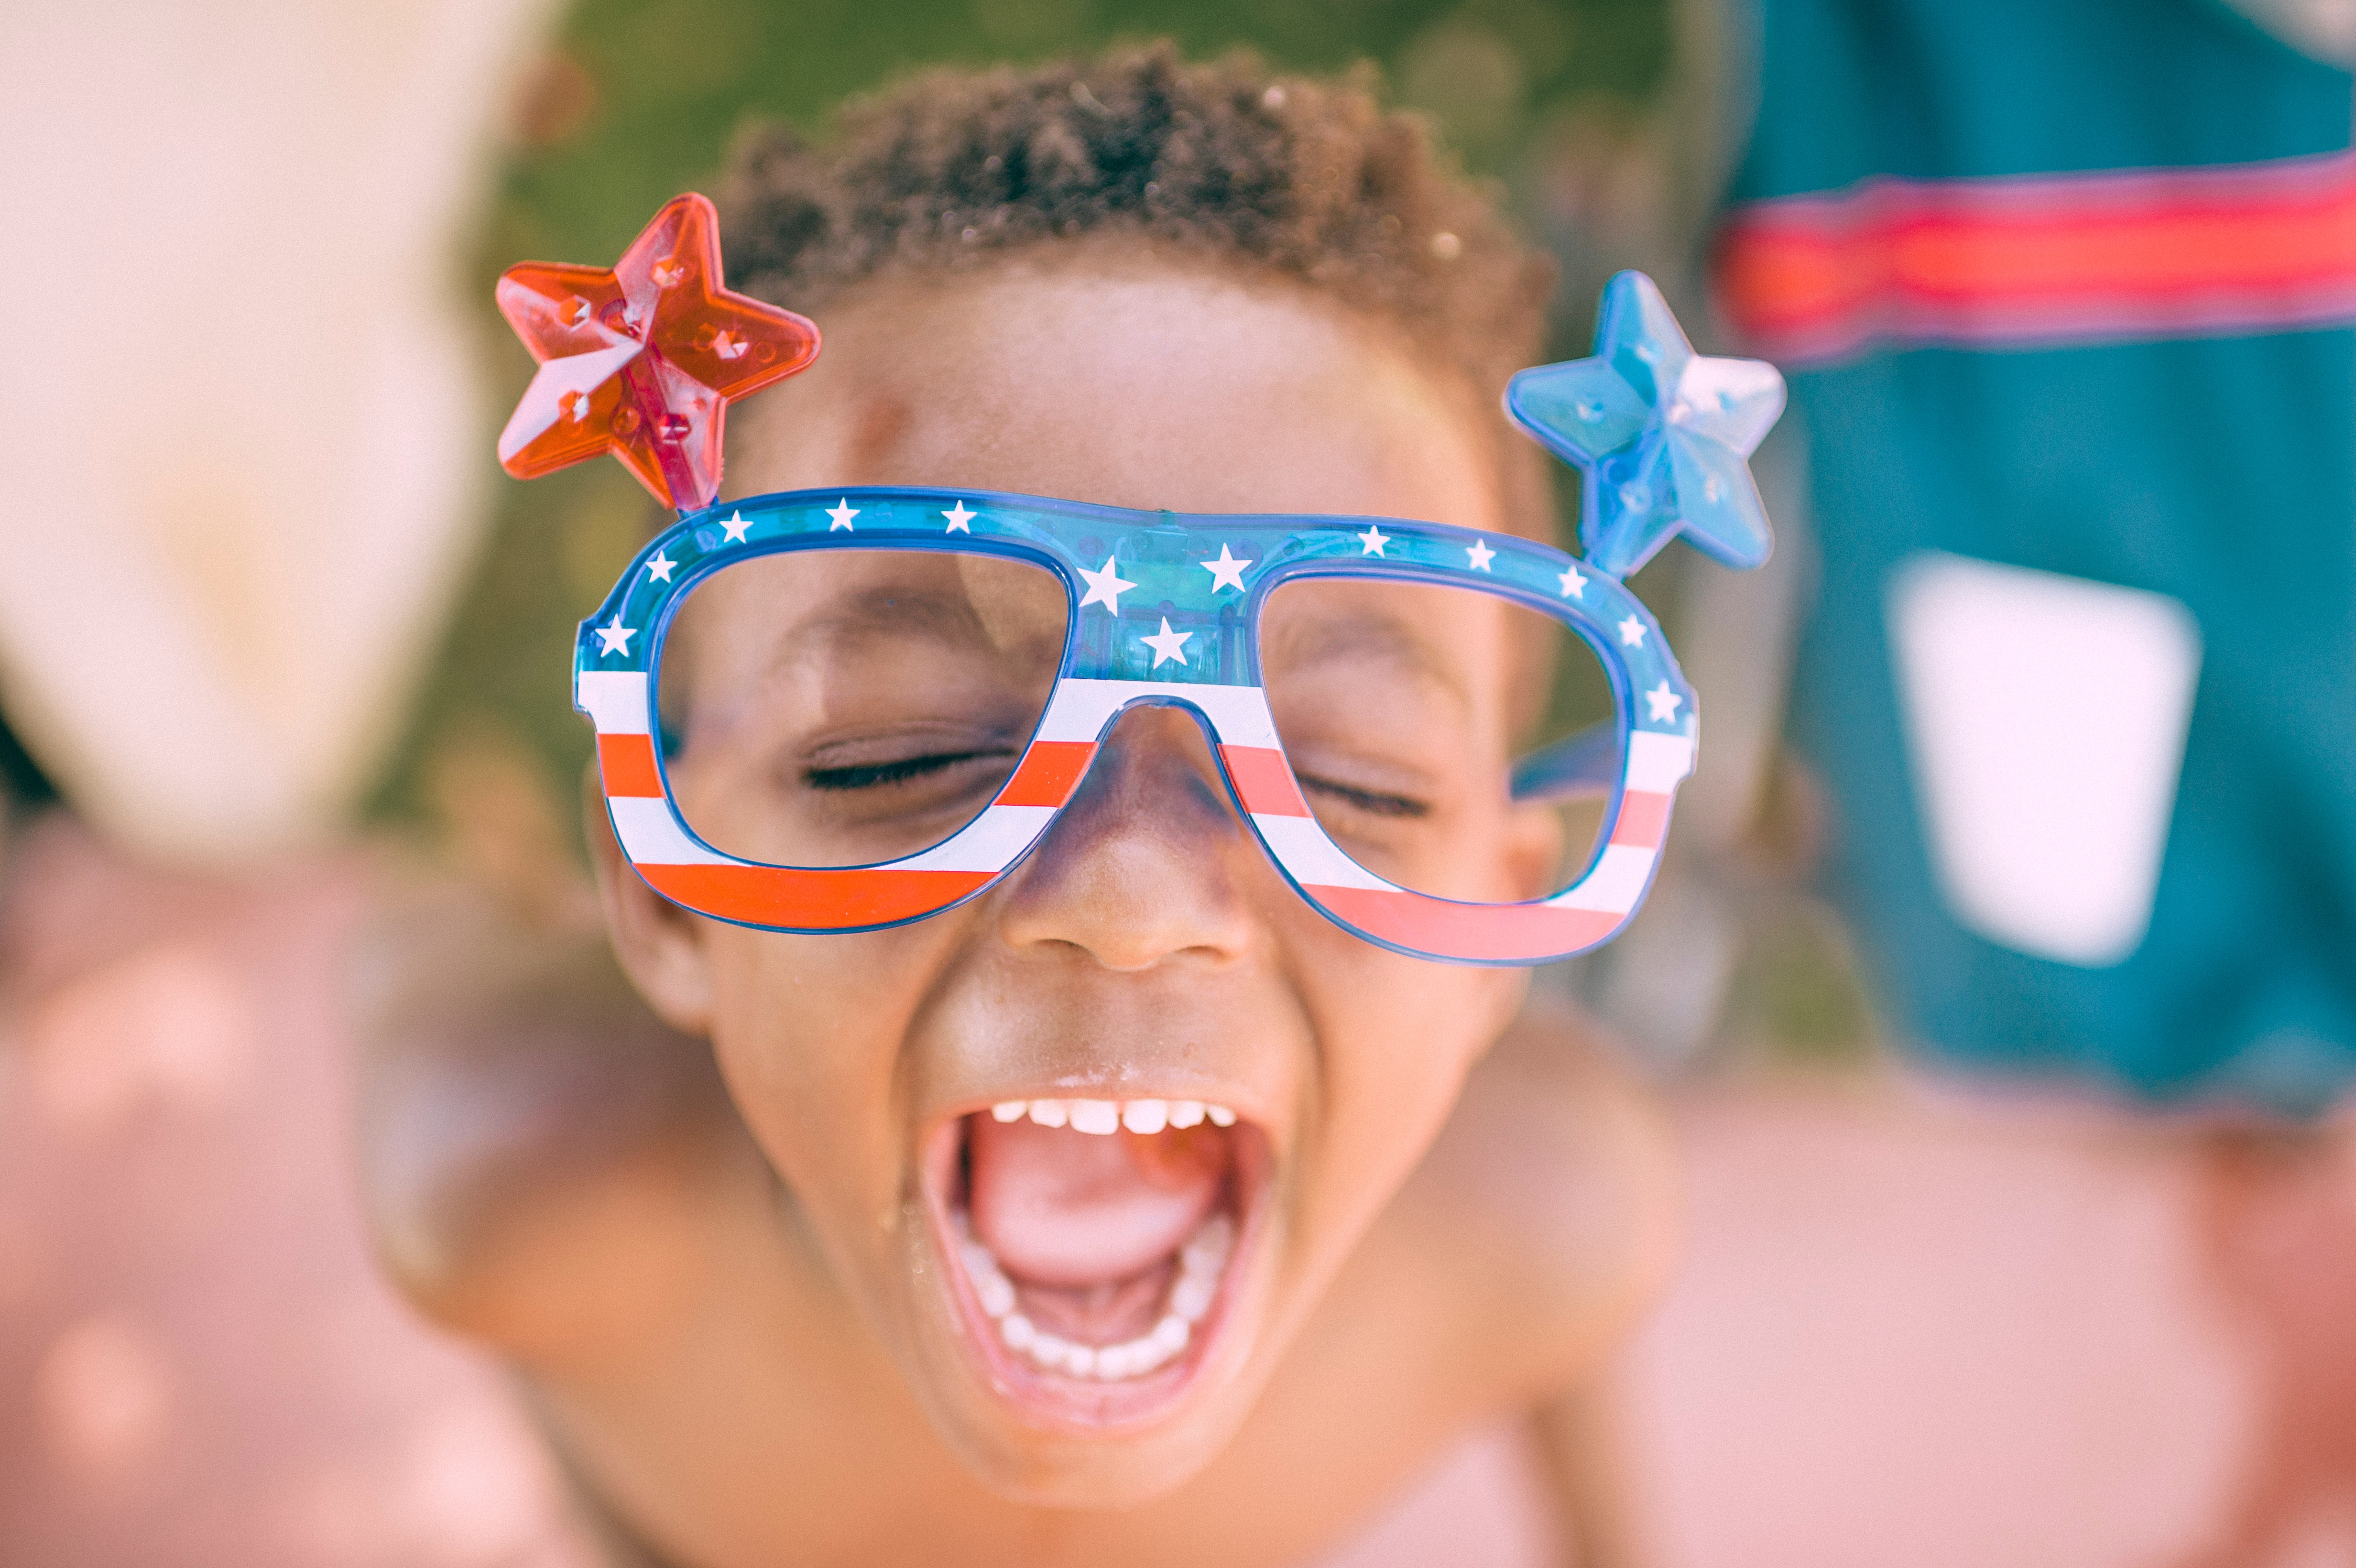 Young boy smiling with USA glasses on.